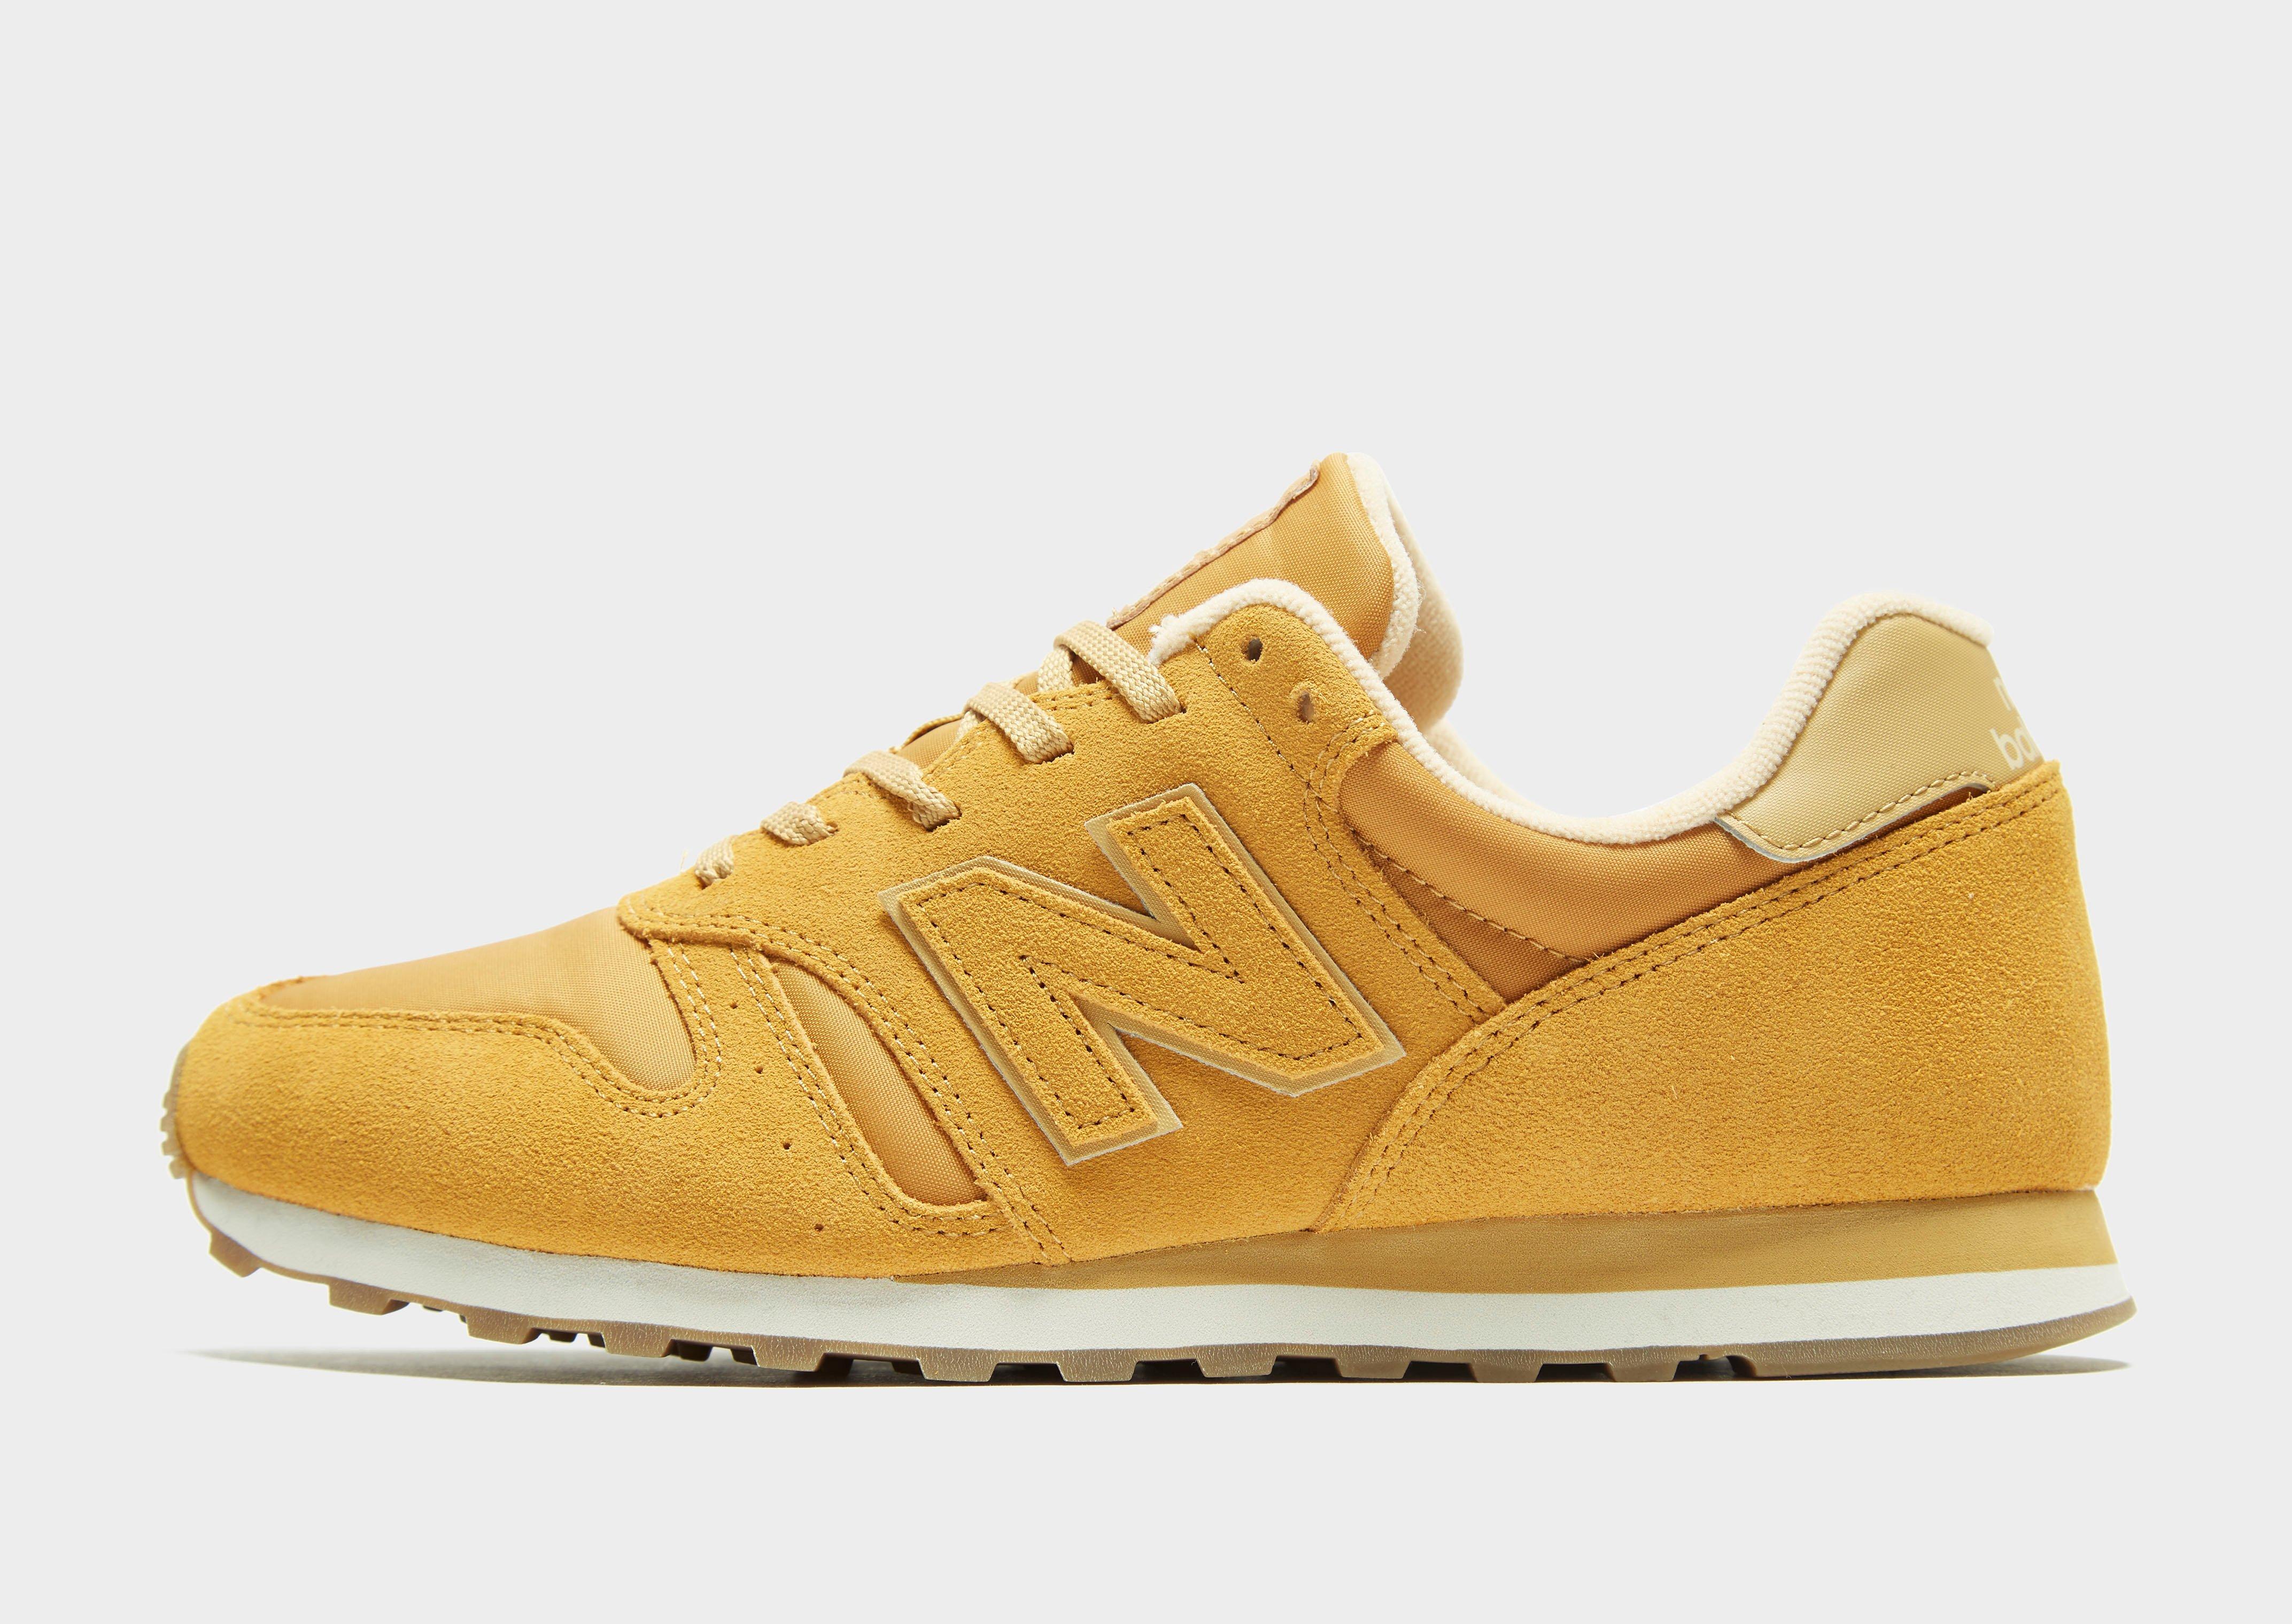 new balance 373 homme chaussures